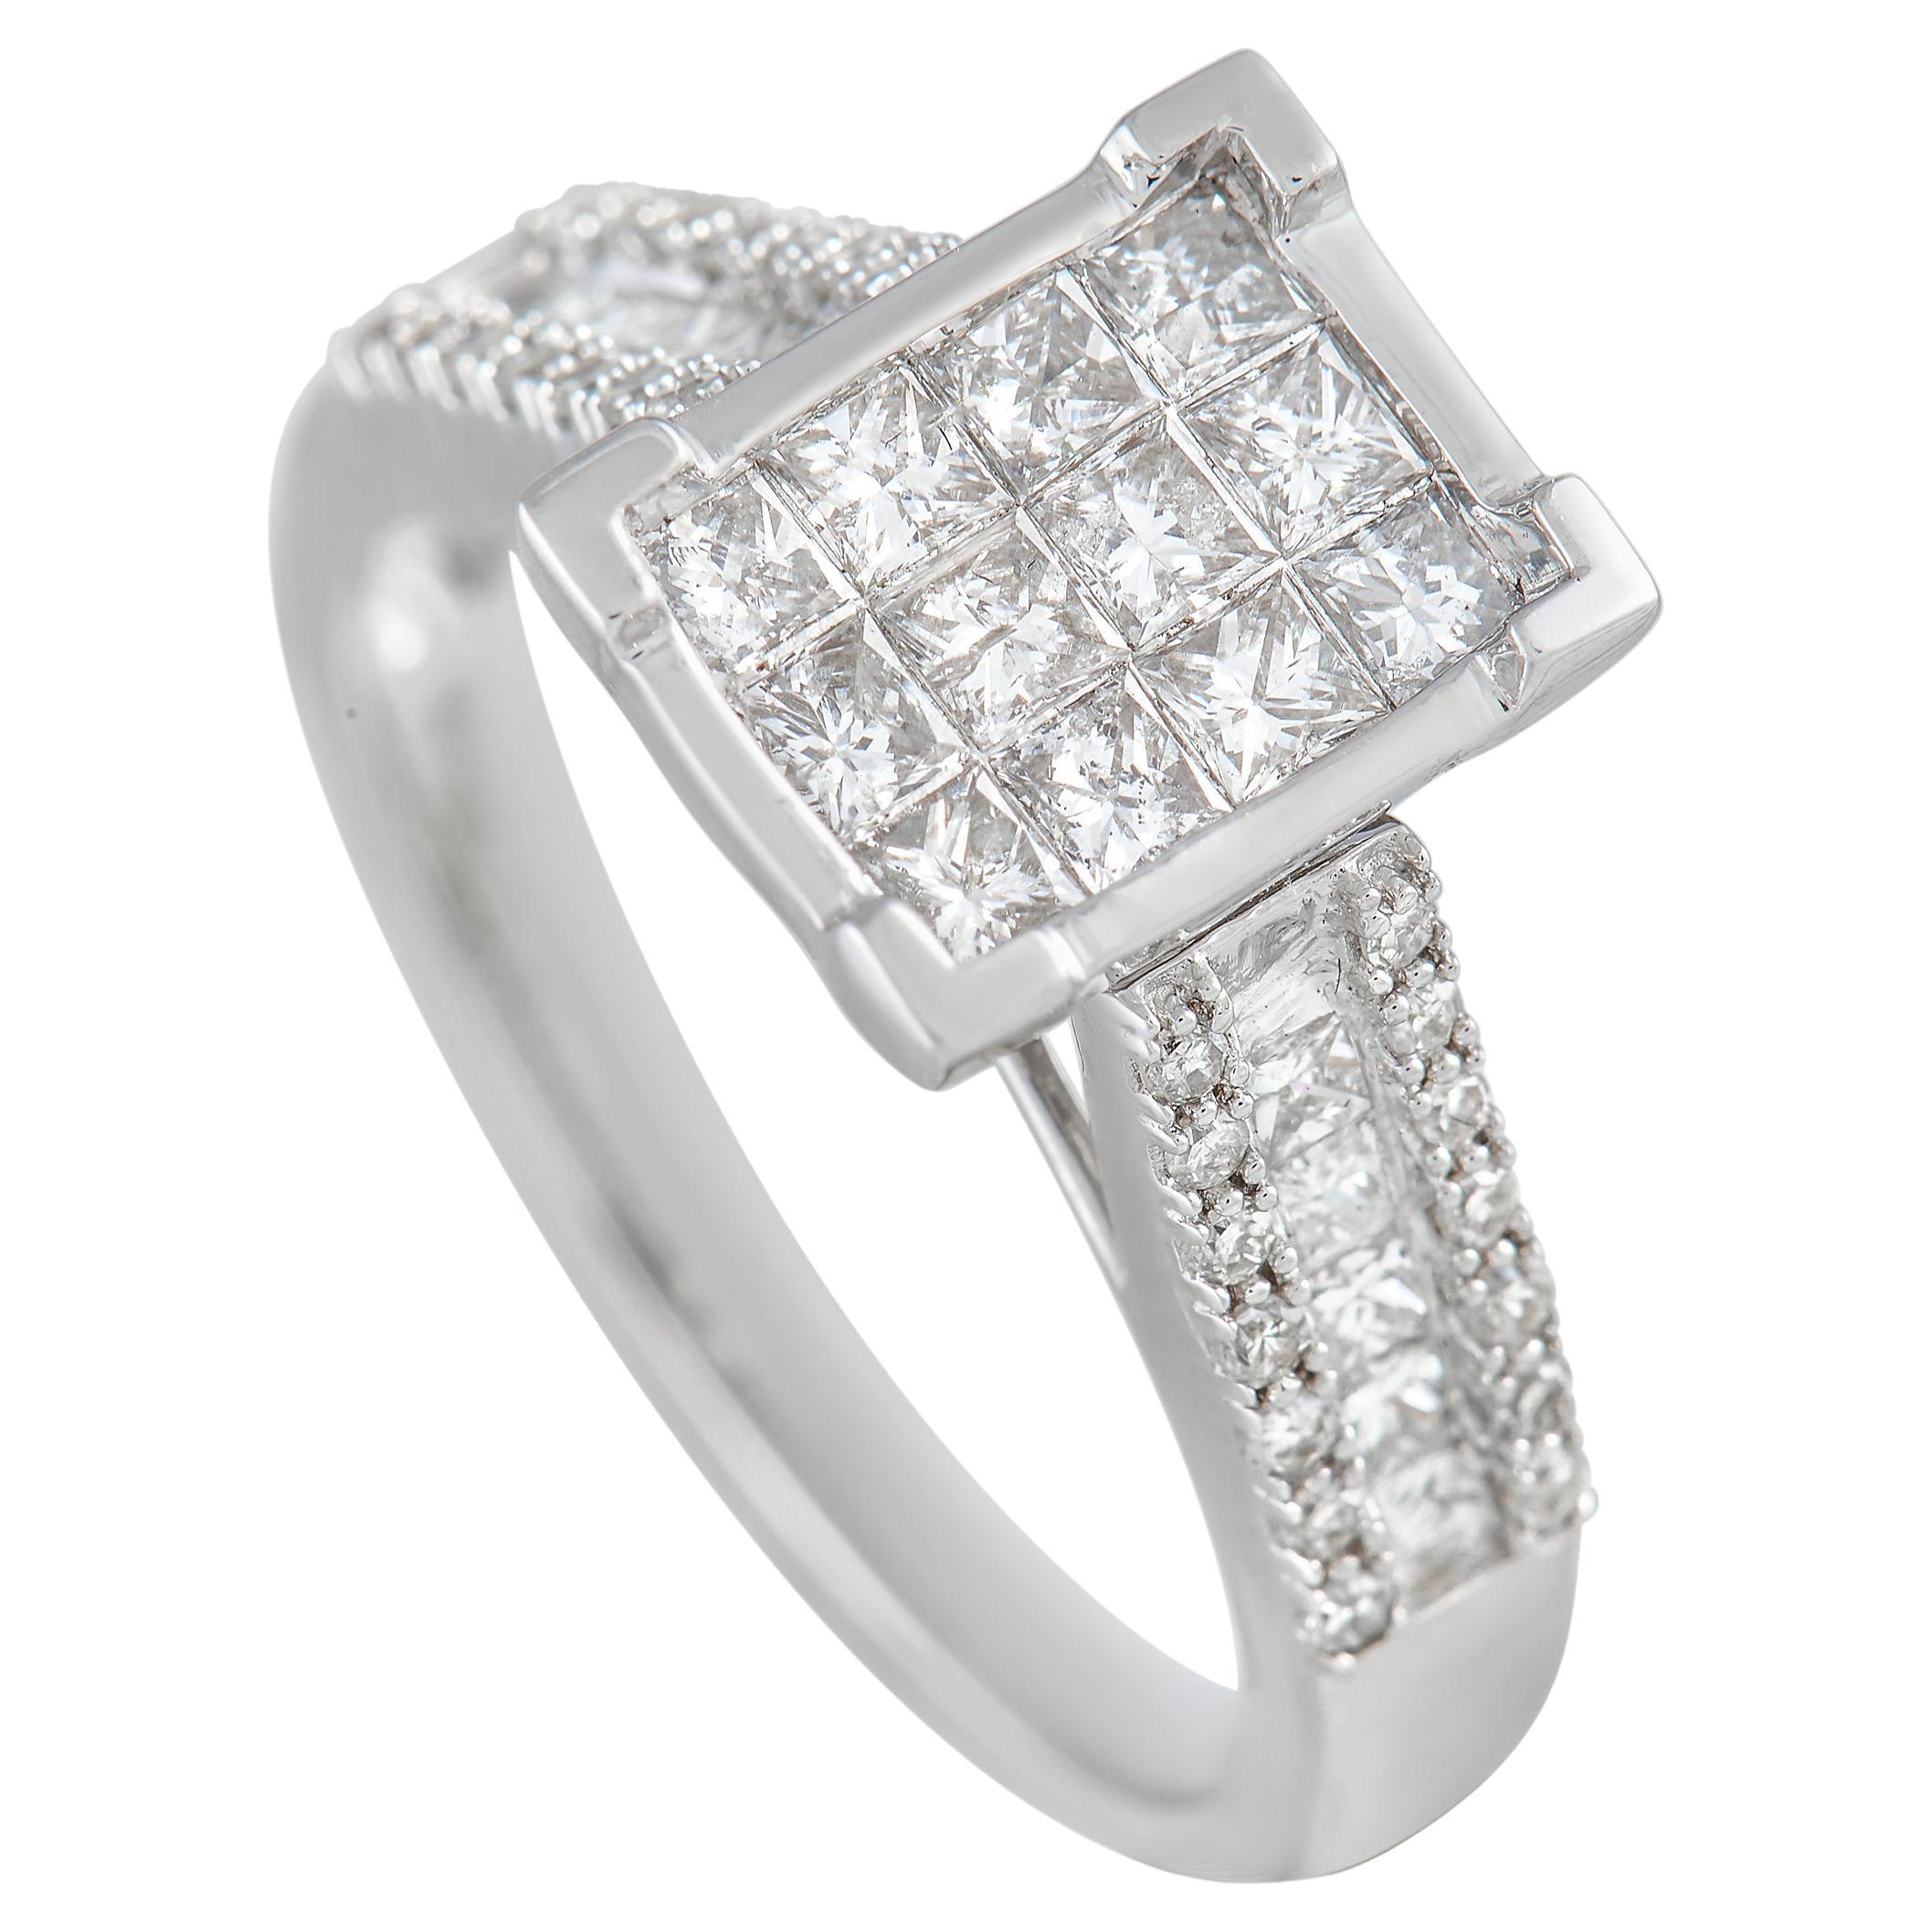 LB Exclusive 14K White Gold 1.00 ct Diamond Ring For Sale